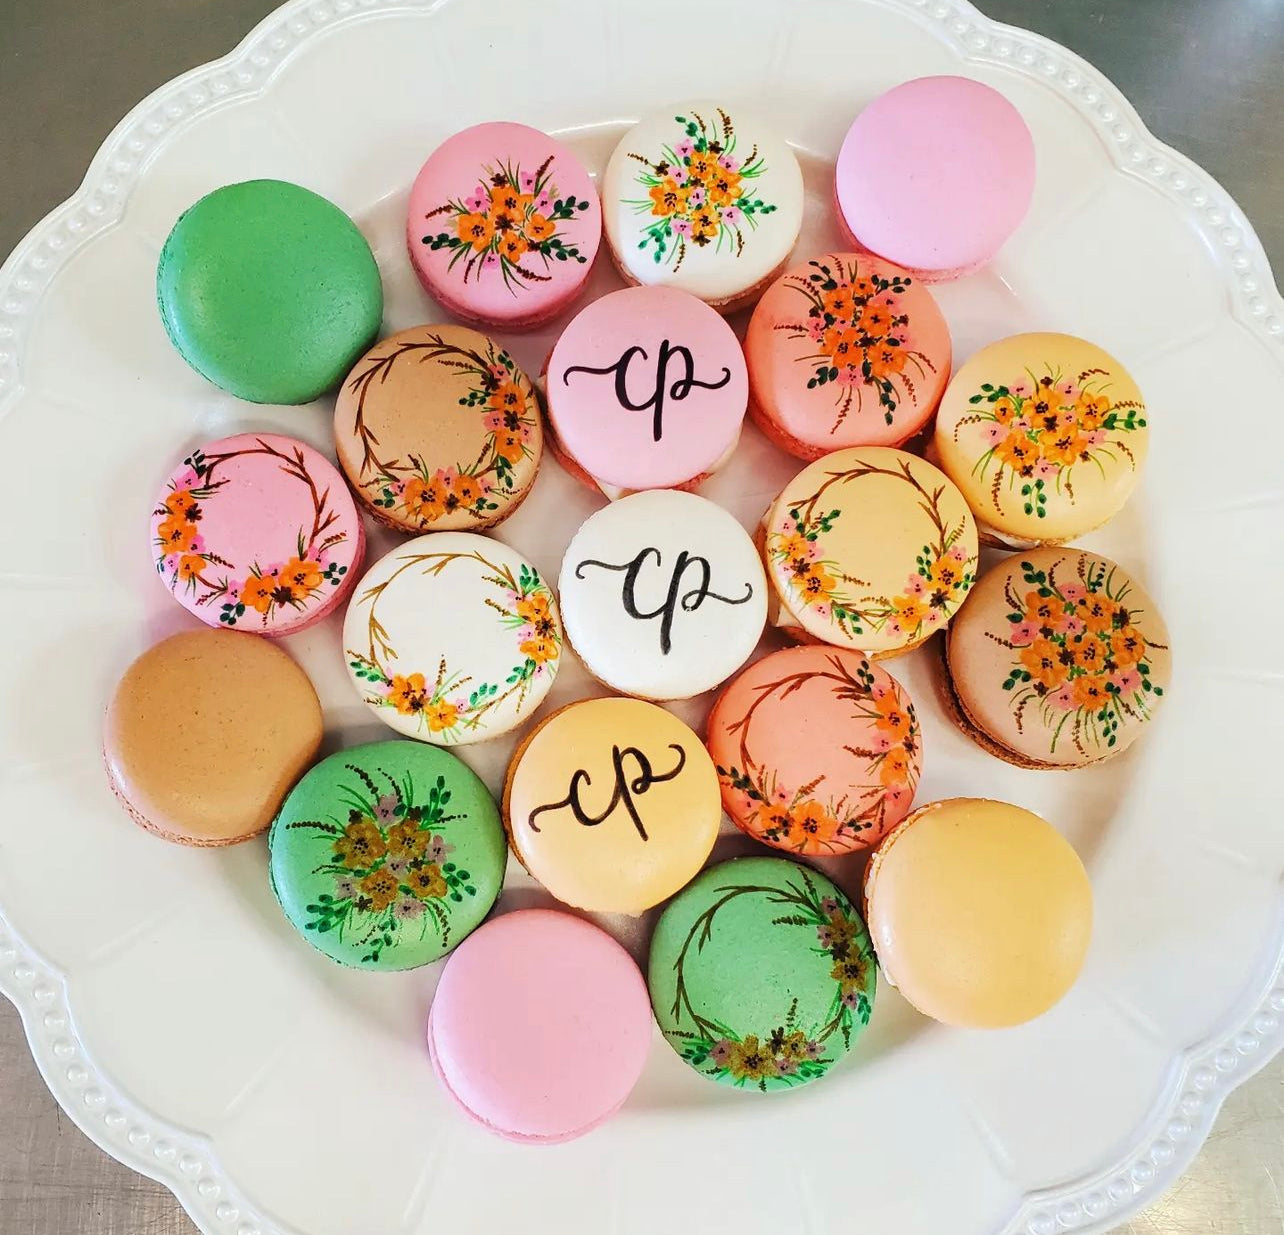 Custom Order- Macarons, Towers, Cakes, and Events